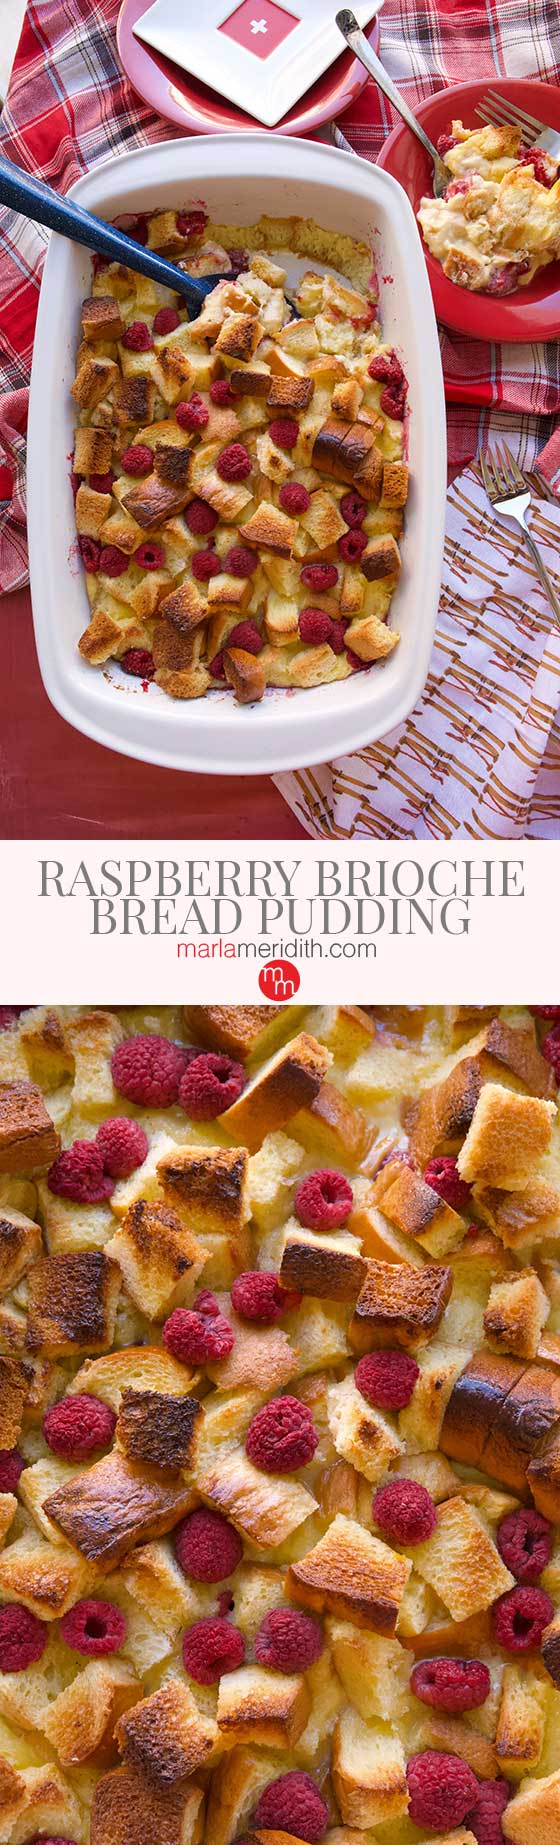 We love this easy and delicious Raspberry Brioche Bread Pudding recipe. Feeds a crowd for breakfast and brunch! MarlaMeridith.com